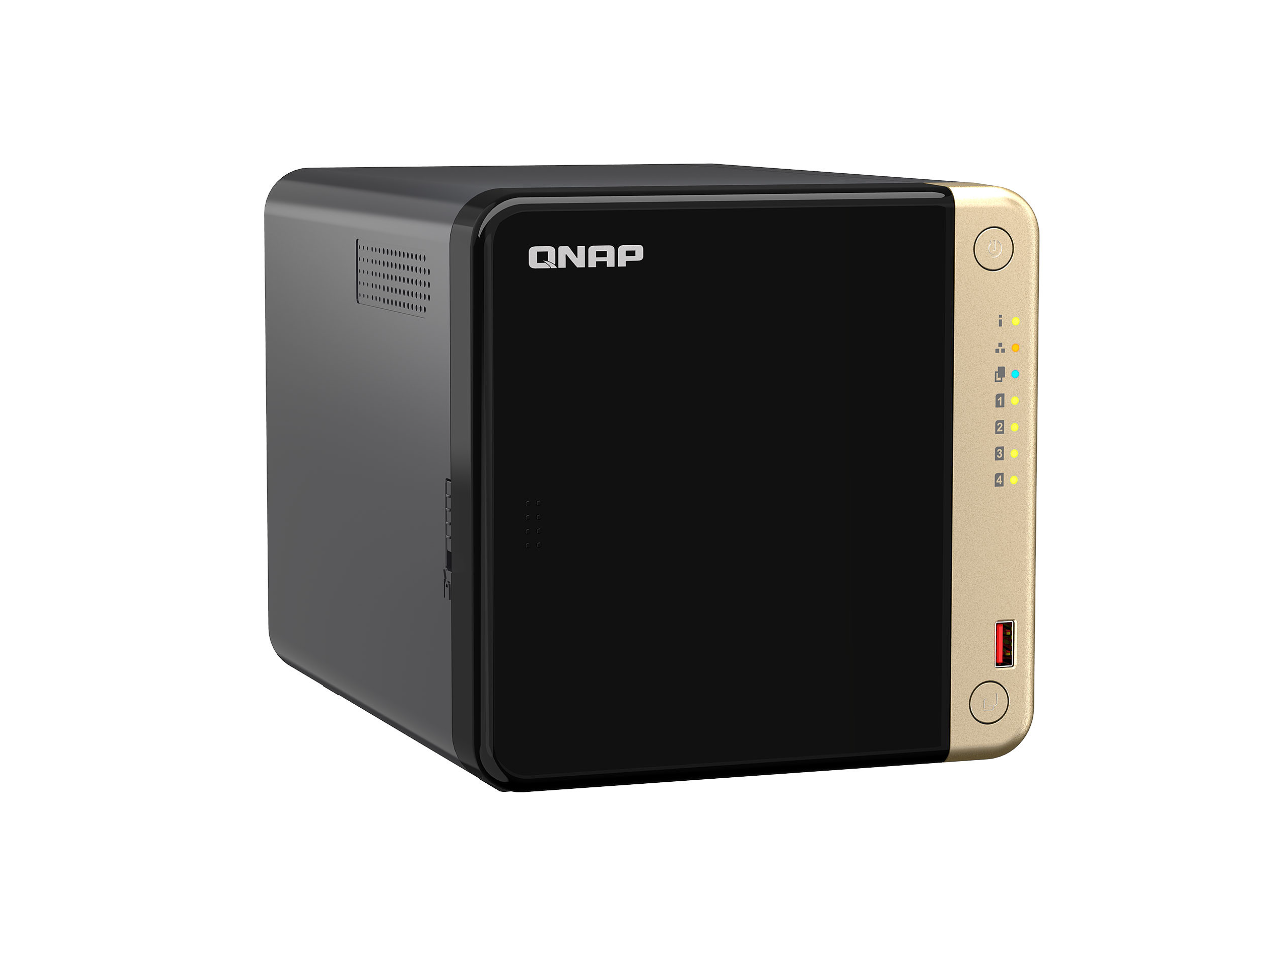 QNAP TS-464 4-Bay NAS with 4GB RAM, 500GB (2 x 250GB) NVME Cache, and 24TB (4 x 6TB) of Western Digital Red Plus Drives Fully Assembled and Tested